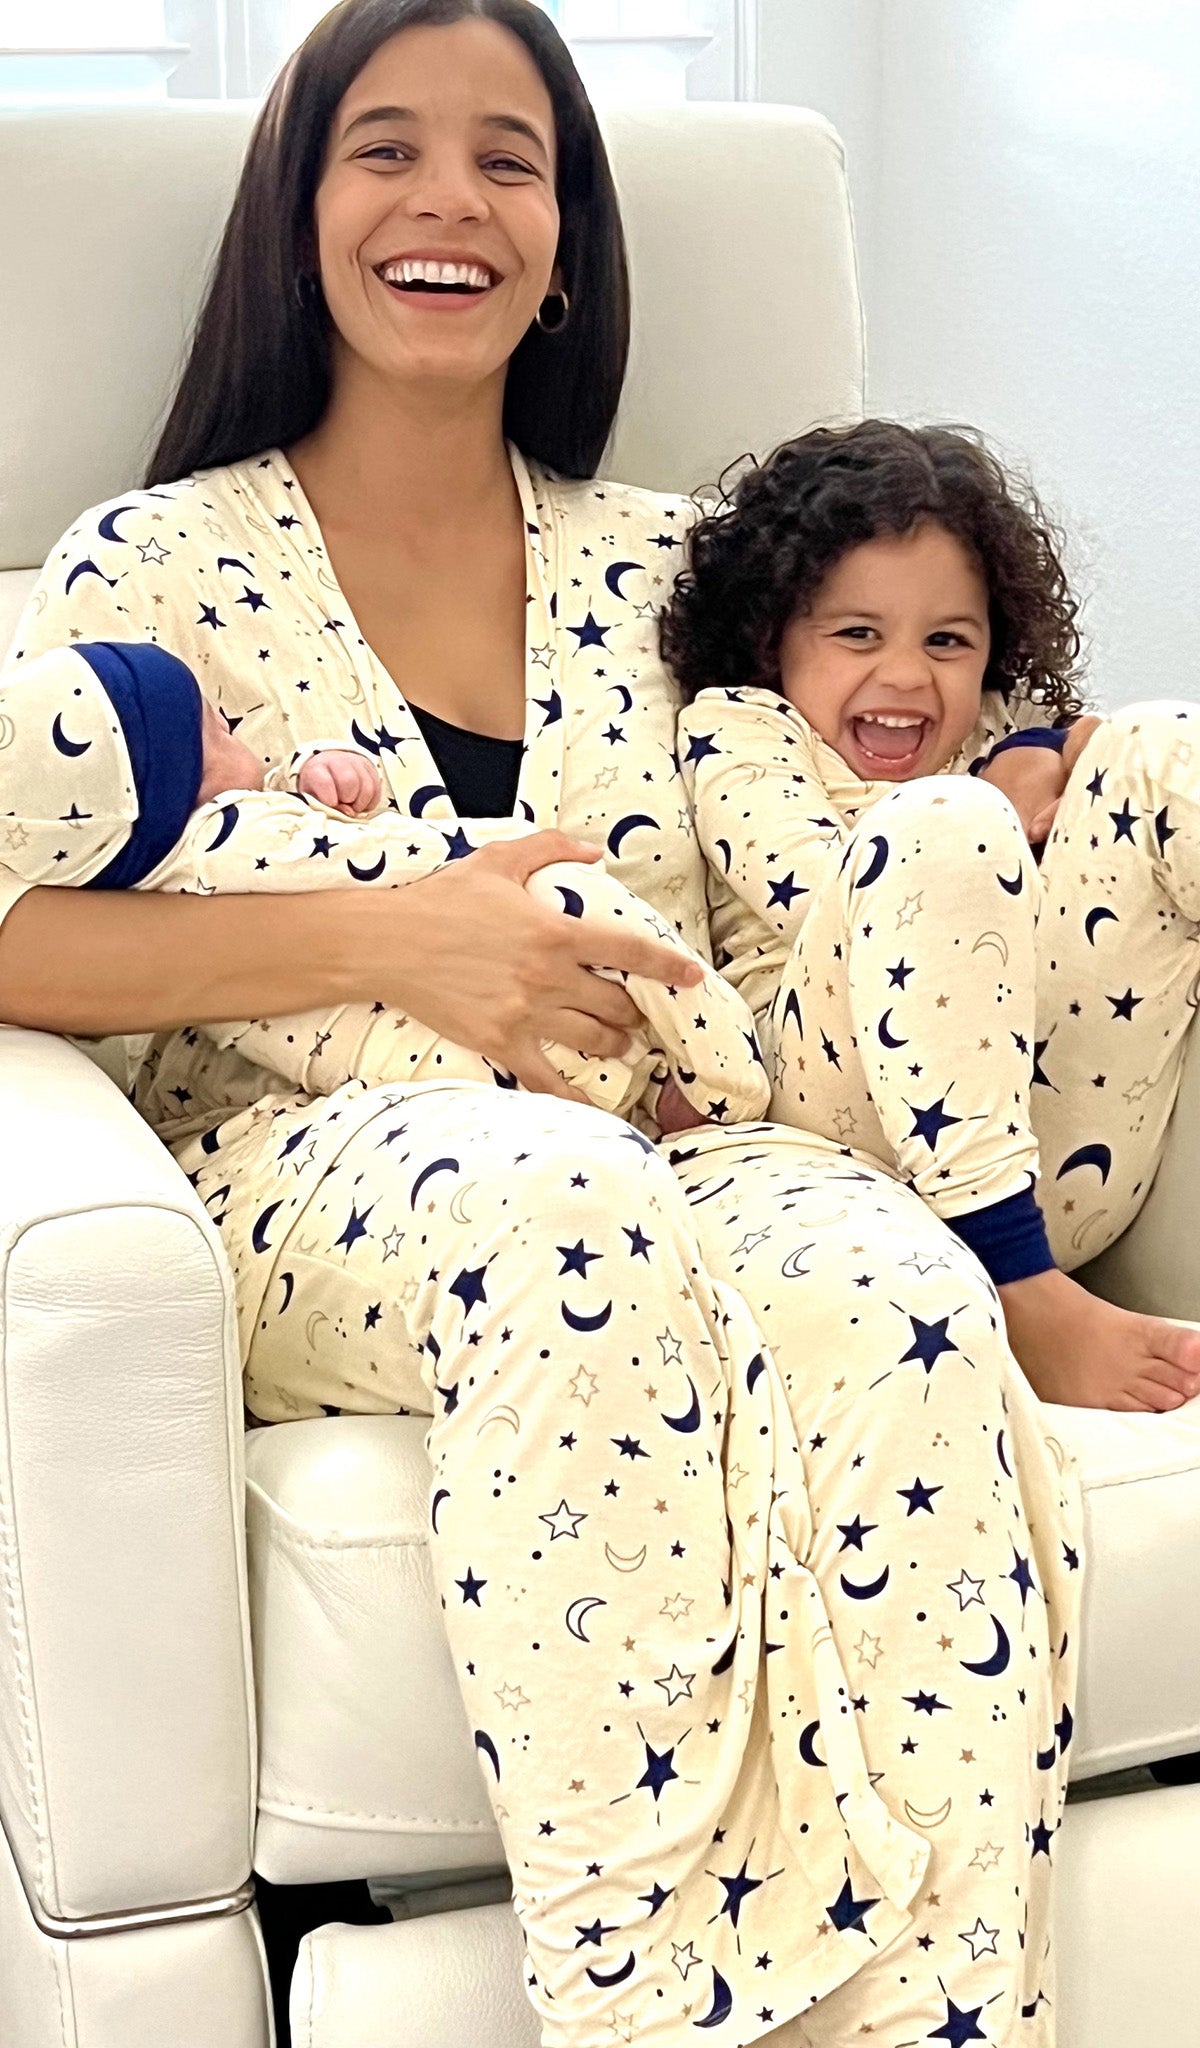 Twinkle Analise 5-Piece Set worn by mom in robe, tank and pant, while holding baby in matching gown and hat. Her son is sitting next to her in matching PJs too.. Pregnant woman wearing 3/4 sleeve robe, tank top and pant while holding a baby gown.